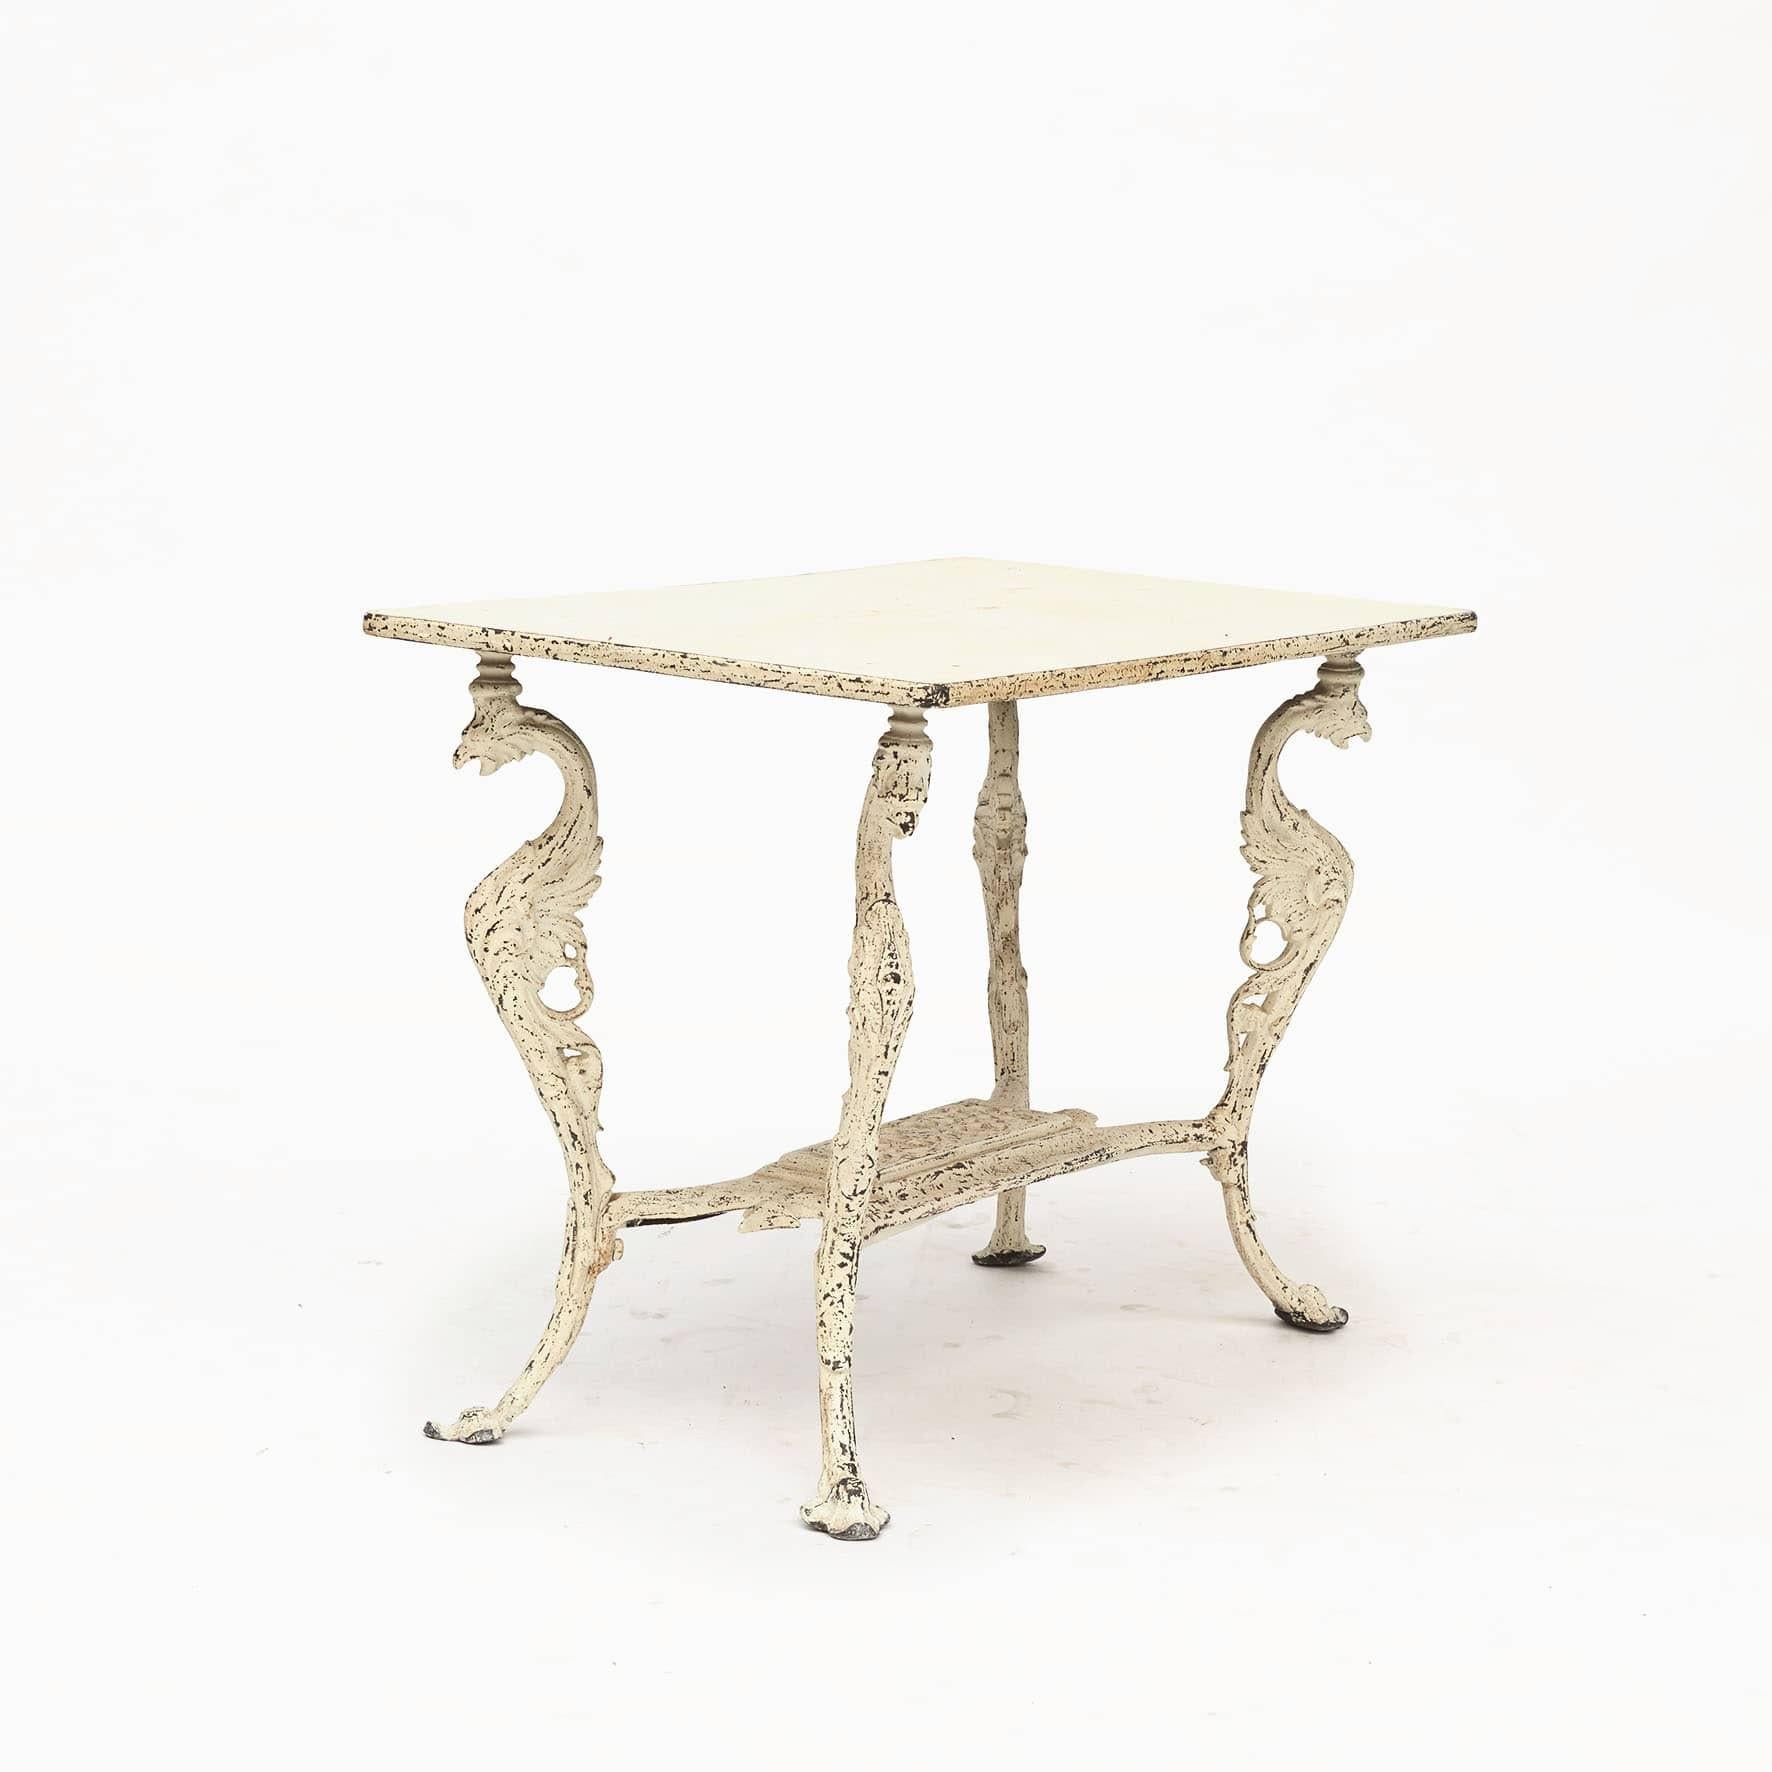 Decorative Swedish cast iron garden table. C 1860-1880
Painted leg formed as griffins.
Made in decorative style and high quality.

